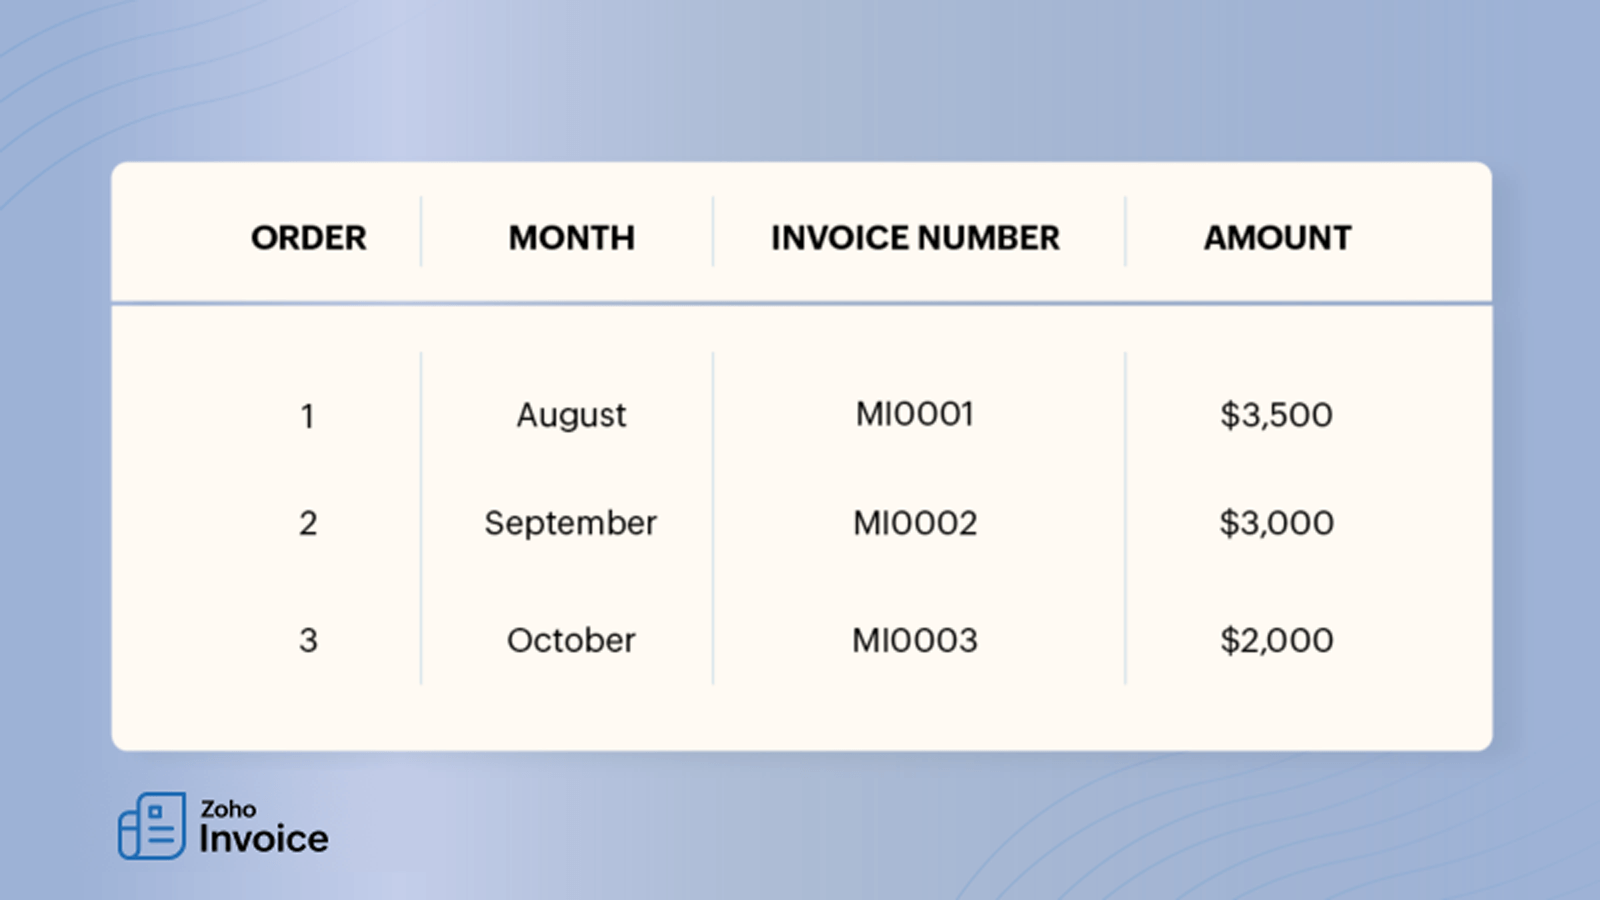 What is an invoice number 